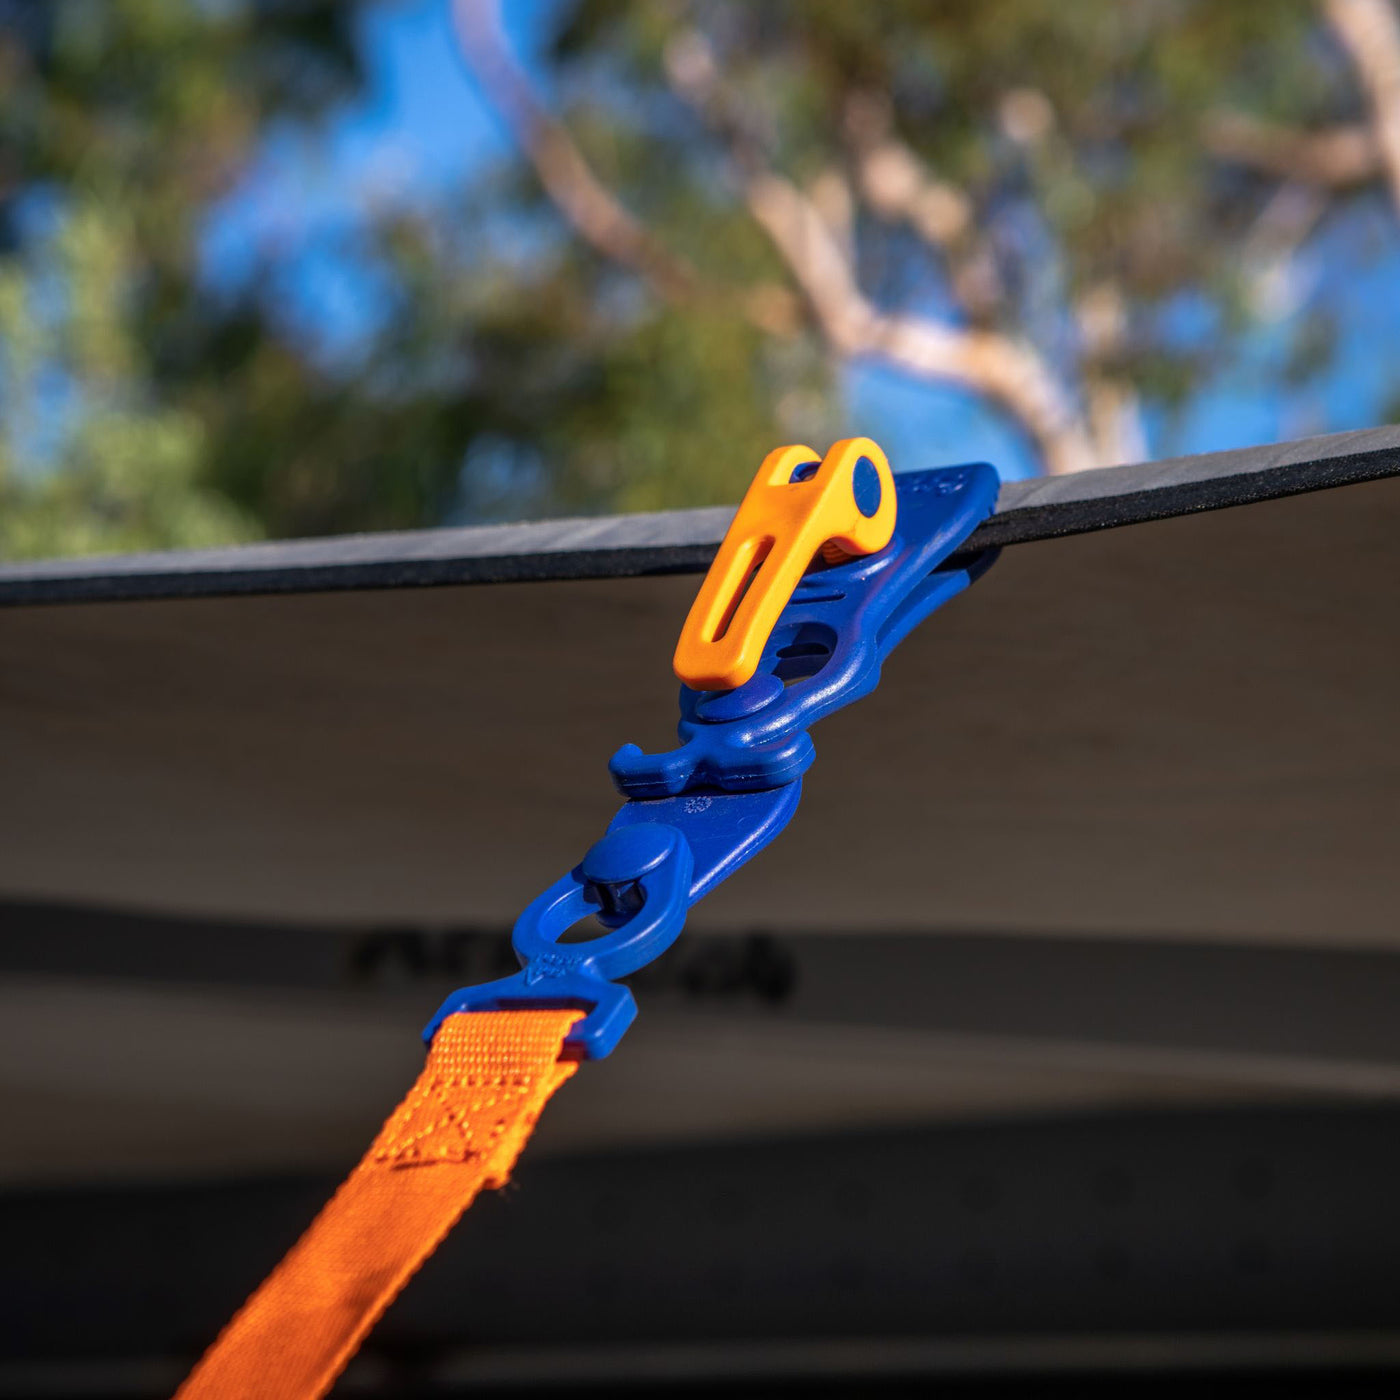 270° & TieDown kit • Set incl. bag • For (4x4/off-road) cars with 270° awnings & for additional tie down